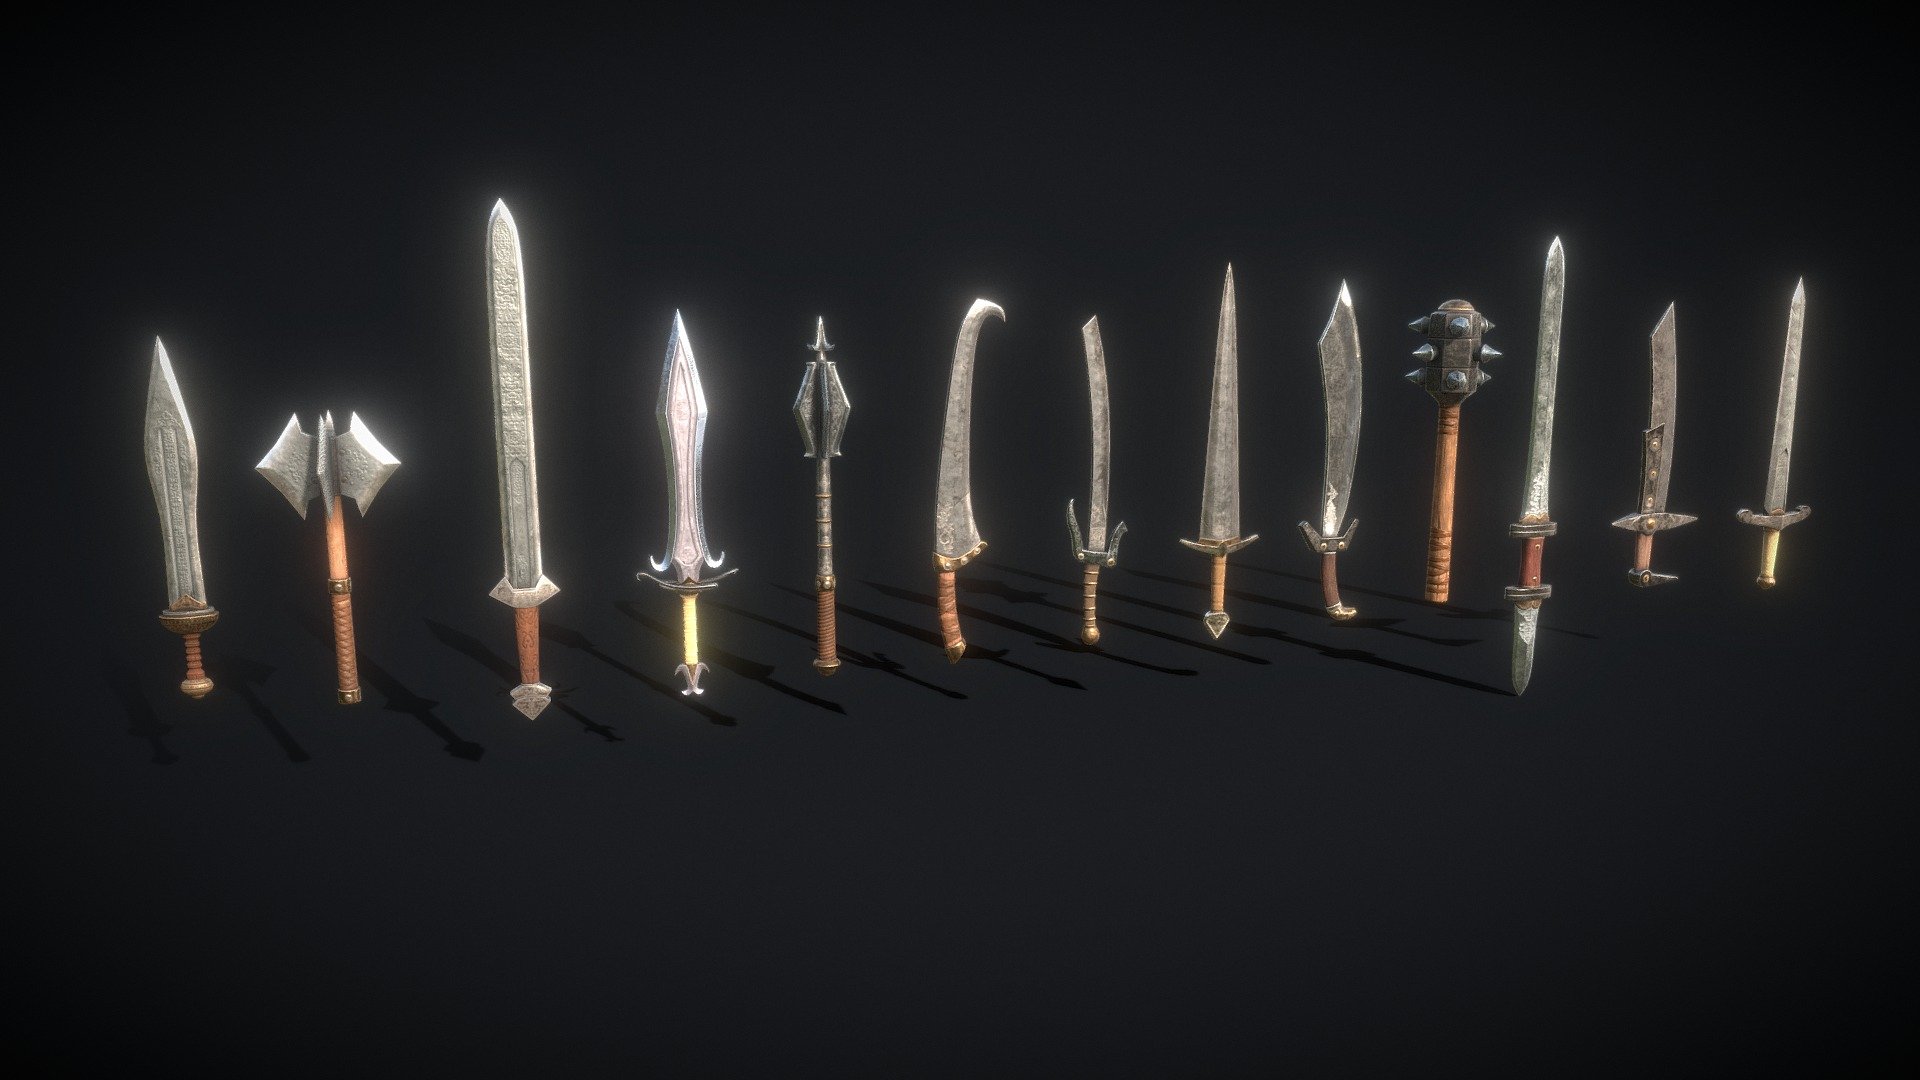 One-handed swords and maces in excellent quality!

The set contains 13 objects.

Each object has PBR textures with a resolution of 2048x2048

Total polygons (triangles): 14406

SM_Comdat sword - 752 tris

SM_Curved_sword - 1054 tris

SM_Dagesse - 1084 tris

SM_Double_sword - 840 tris

SM_Elf sword - 2988 tris

SM_Gladius - 1548 tris

SM_Great_mace - 1184 tris

SM_Havy_Mace - 1600 tris

SM_Heavy_sword - 892 tris

SM_Hooked_sword - 562 tris

SM_Mace - 608 tris

SM_Scimitar - 636 tris

SM_Sharp_sword - 658 tris

Archives with textures contain:

PNG textures - base color, metallic, normal, roughness

Texturing Unity (Metallic Smoothness) - AlbedoTransparency, MetallicSmoothness, Normal

Texturing Unreal Engine - BaseColor, Normal, OcclusionRoughnessMetallic - Knight set - 3D model by zilbeerman 3d model